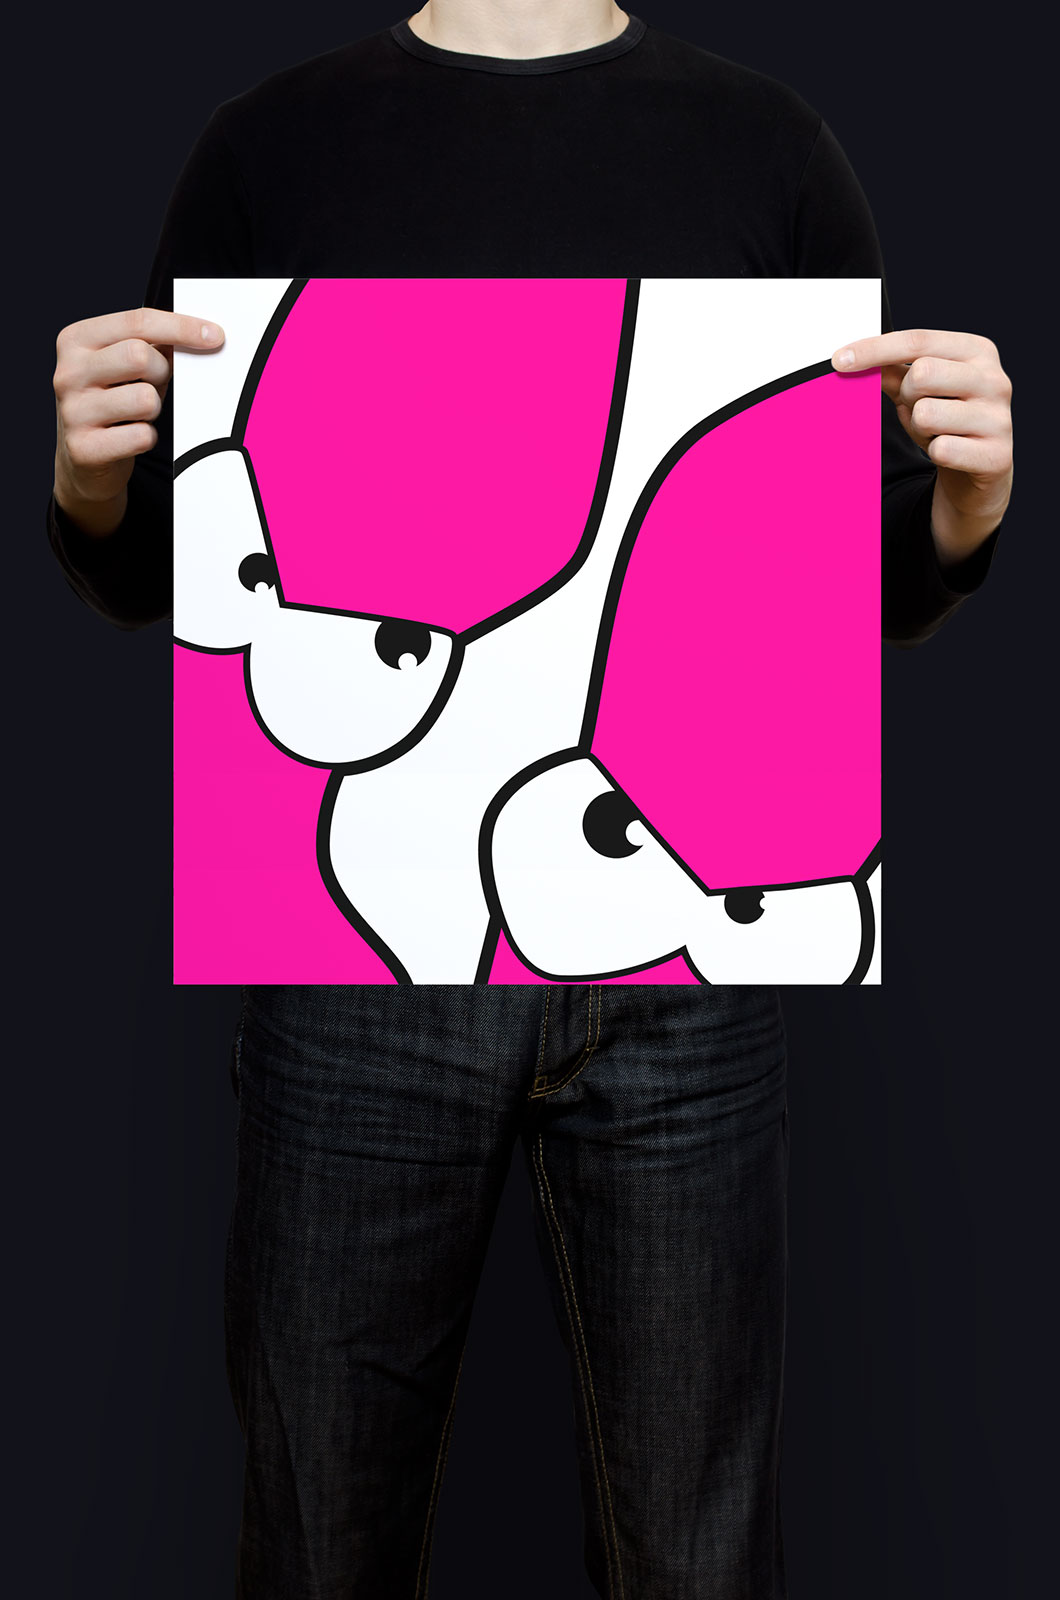 Alexander Glante - Works - The Pink Thing - 07